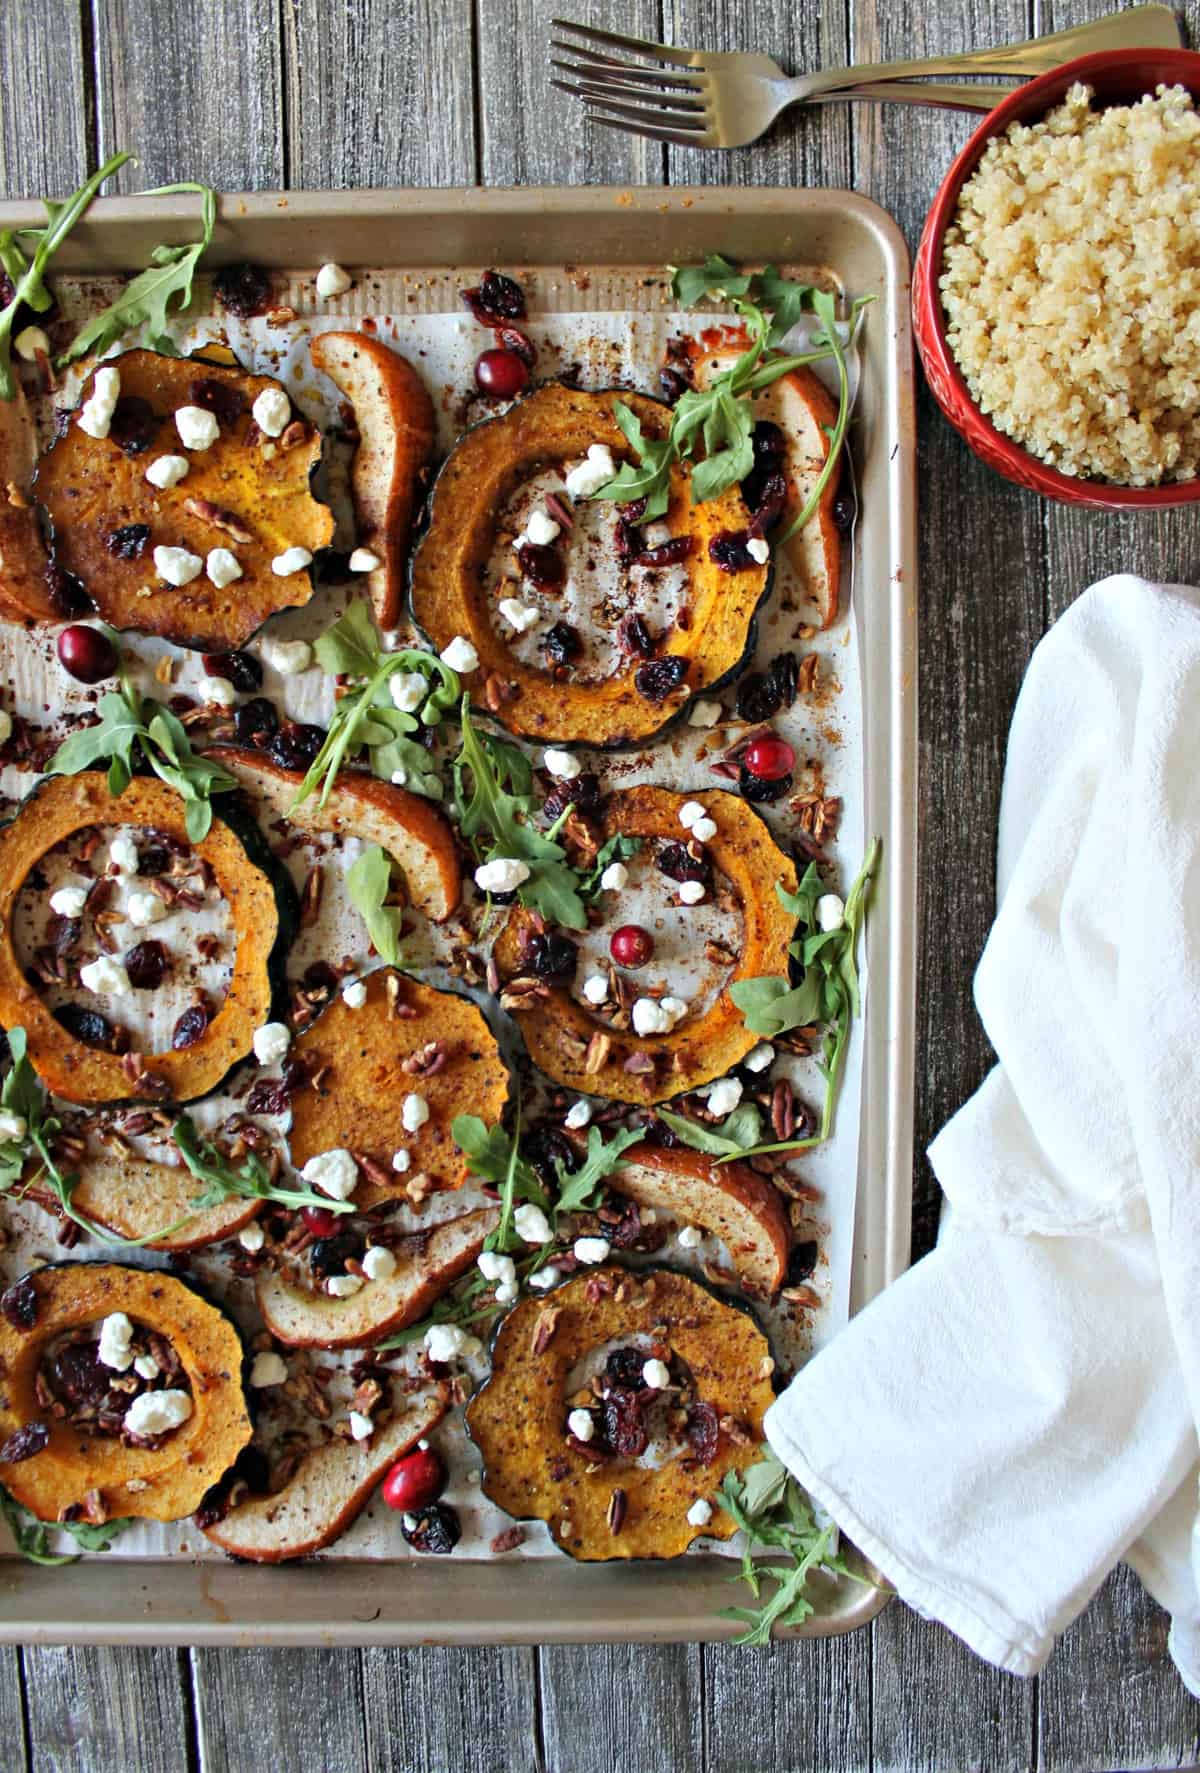 Spiced acorn squash, pears and quinoa cook simultaneously in the oven before being tossed with dried cranberries, pecans, goat cheese, and fresh arugula.